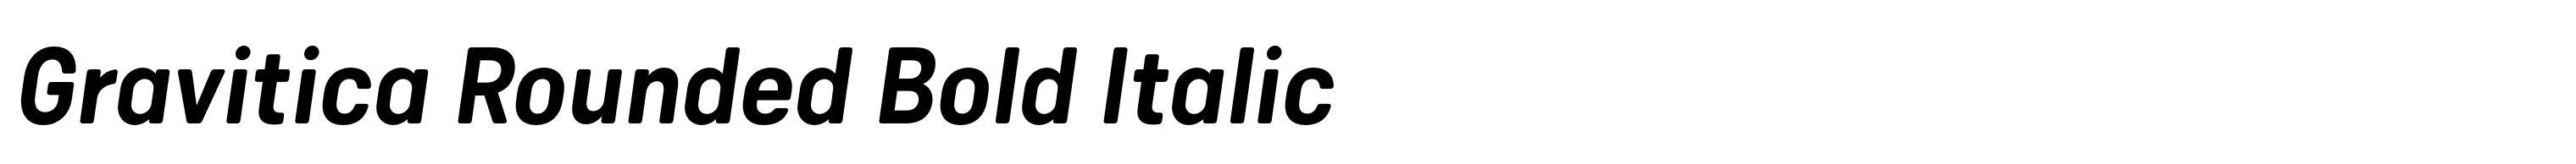 Gravitica Rounded Bold Italic